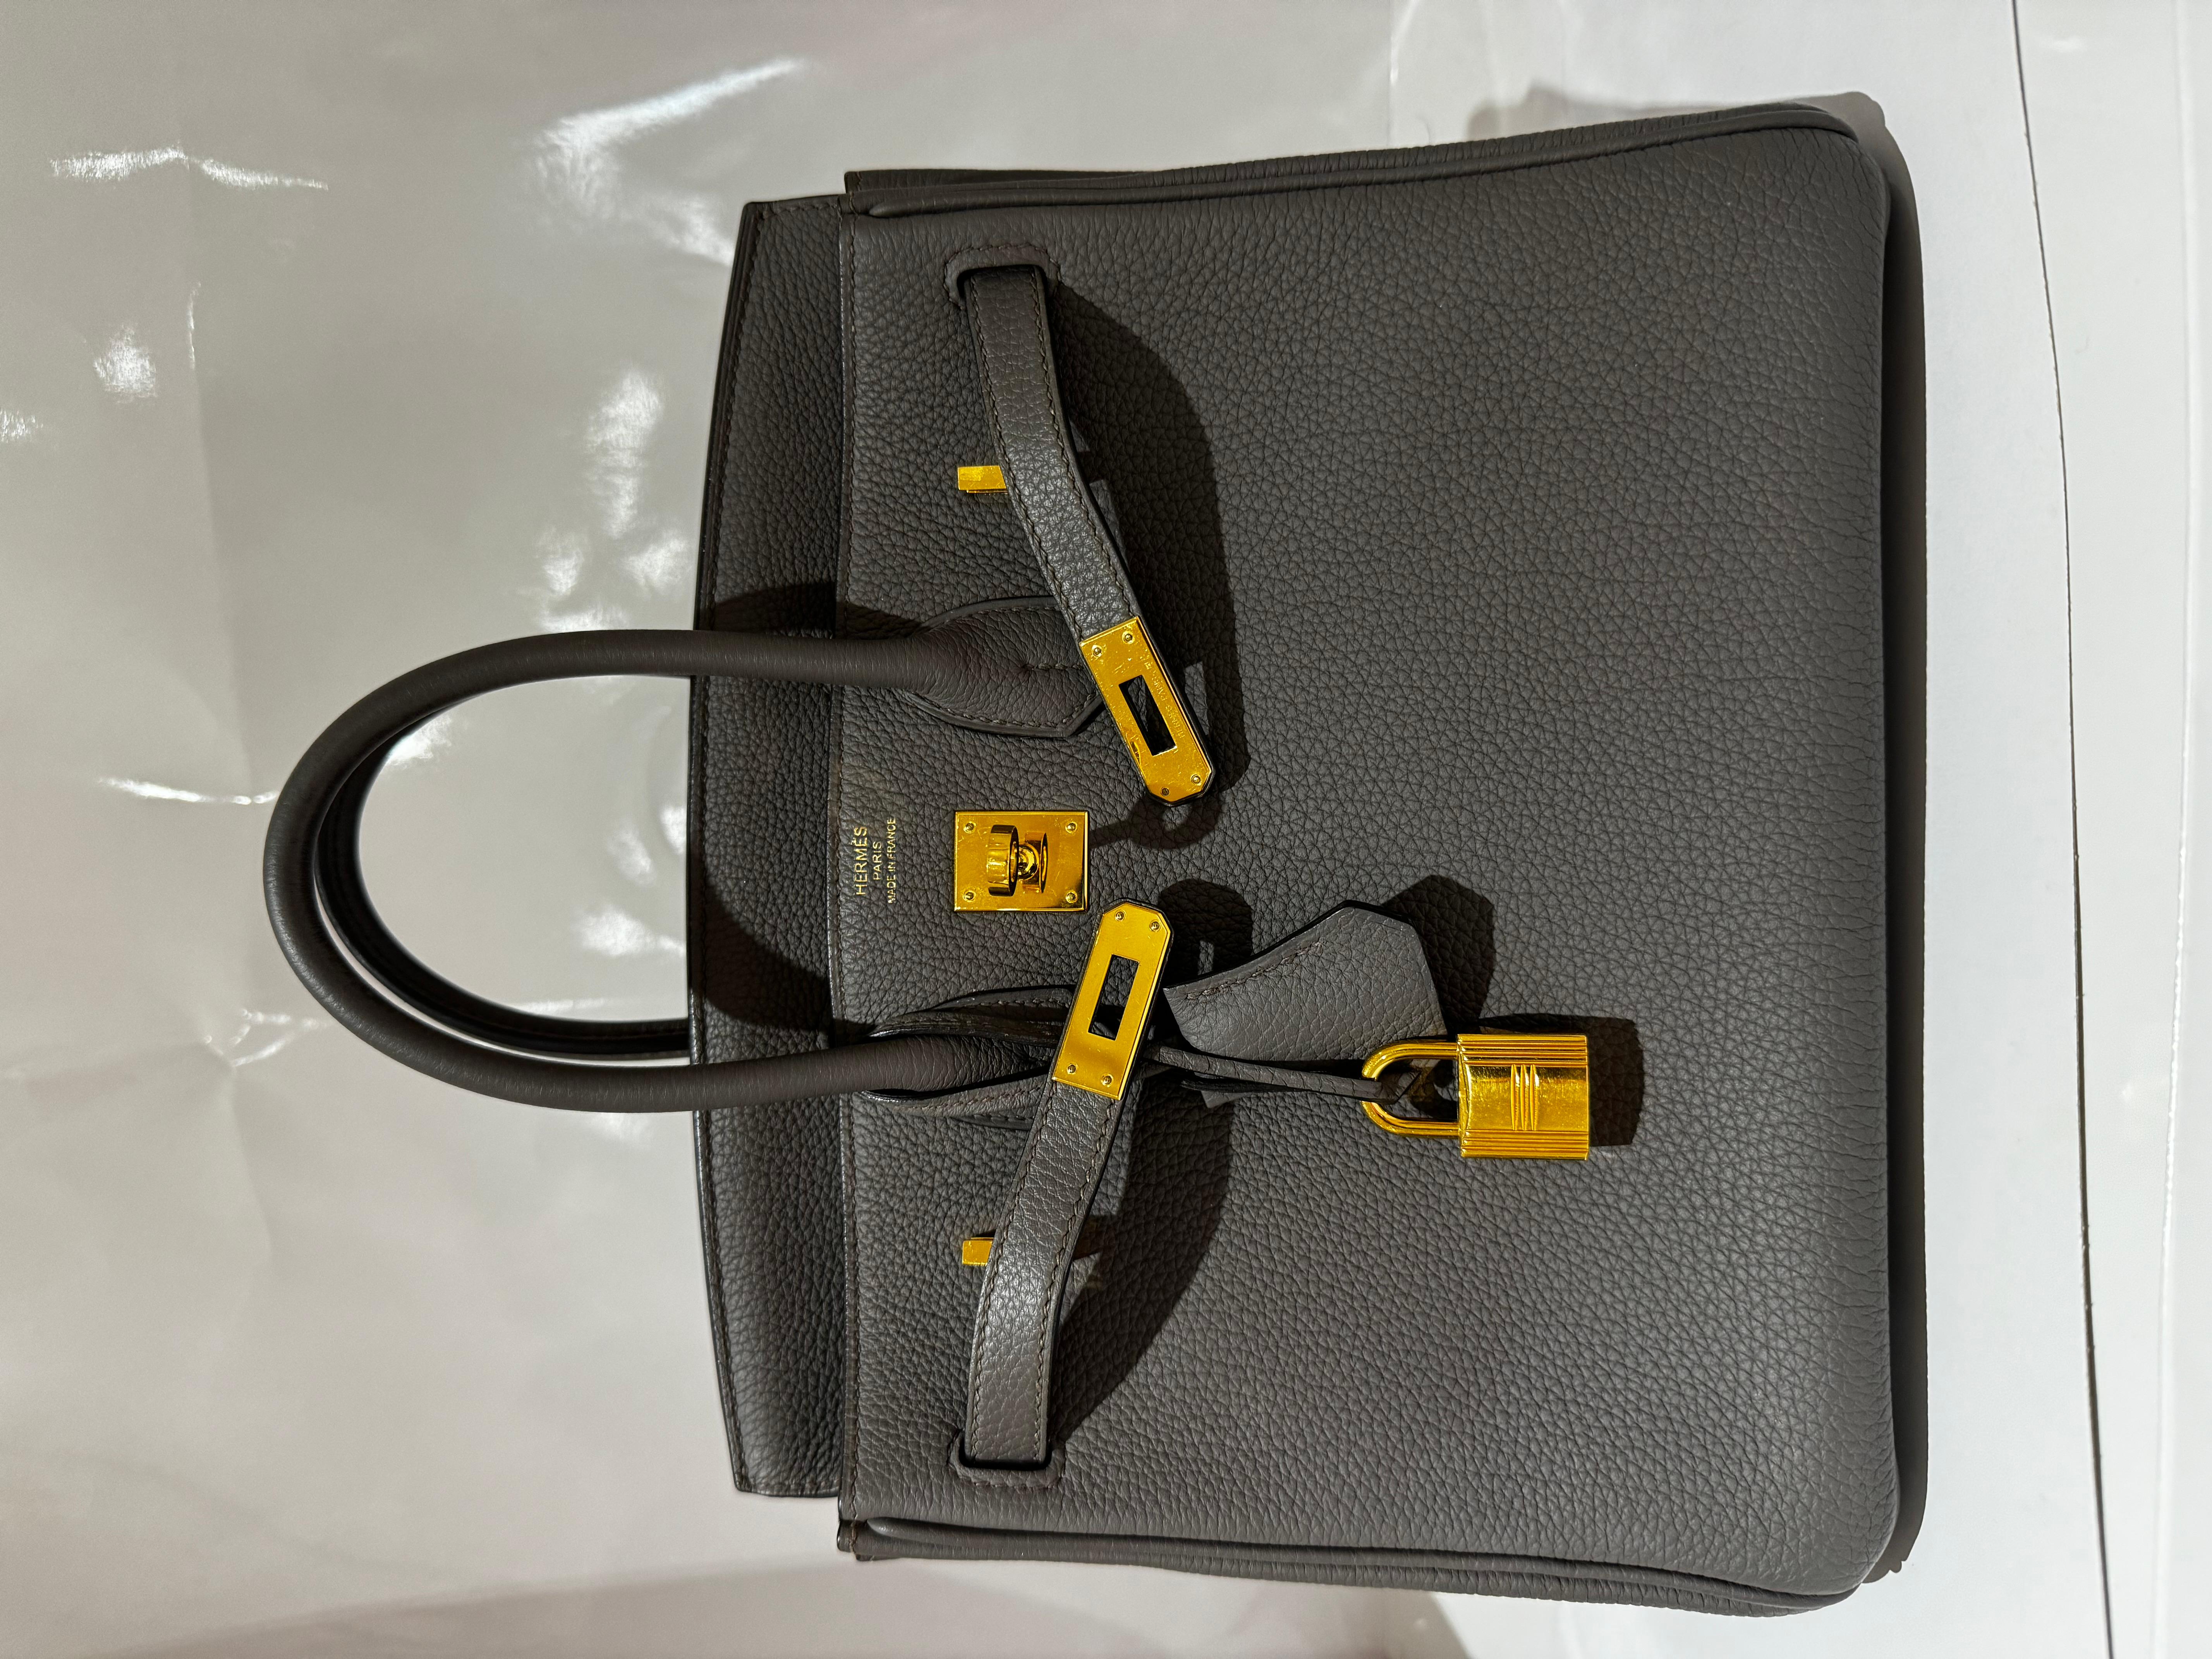 Hermes Birkin 25 in Gris Etain Togo Leather with Gold Hardware handbag. A very classic combo.

Grey grained semi matte finish leather exterior, two top handles. Comes with dustbag and clochette, lock and keys. Very good condition, only few signs in